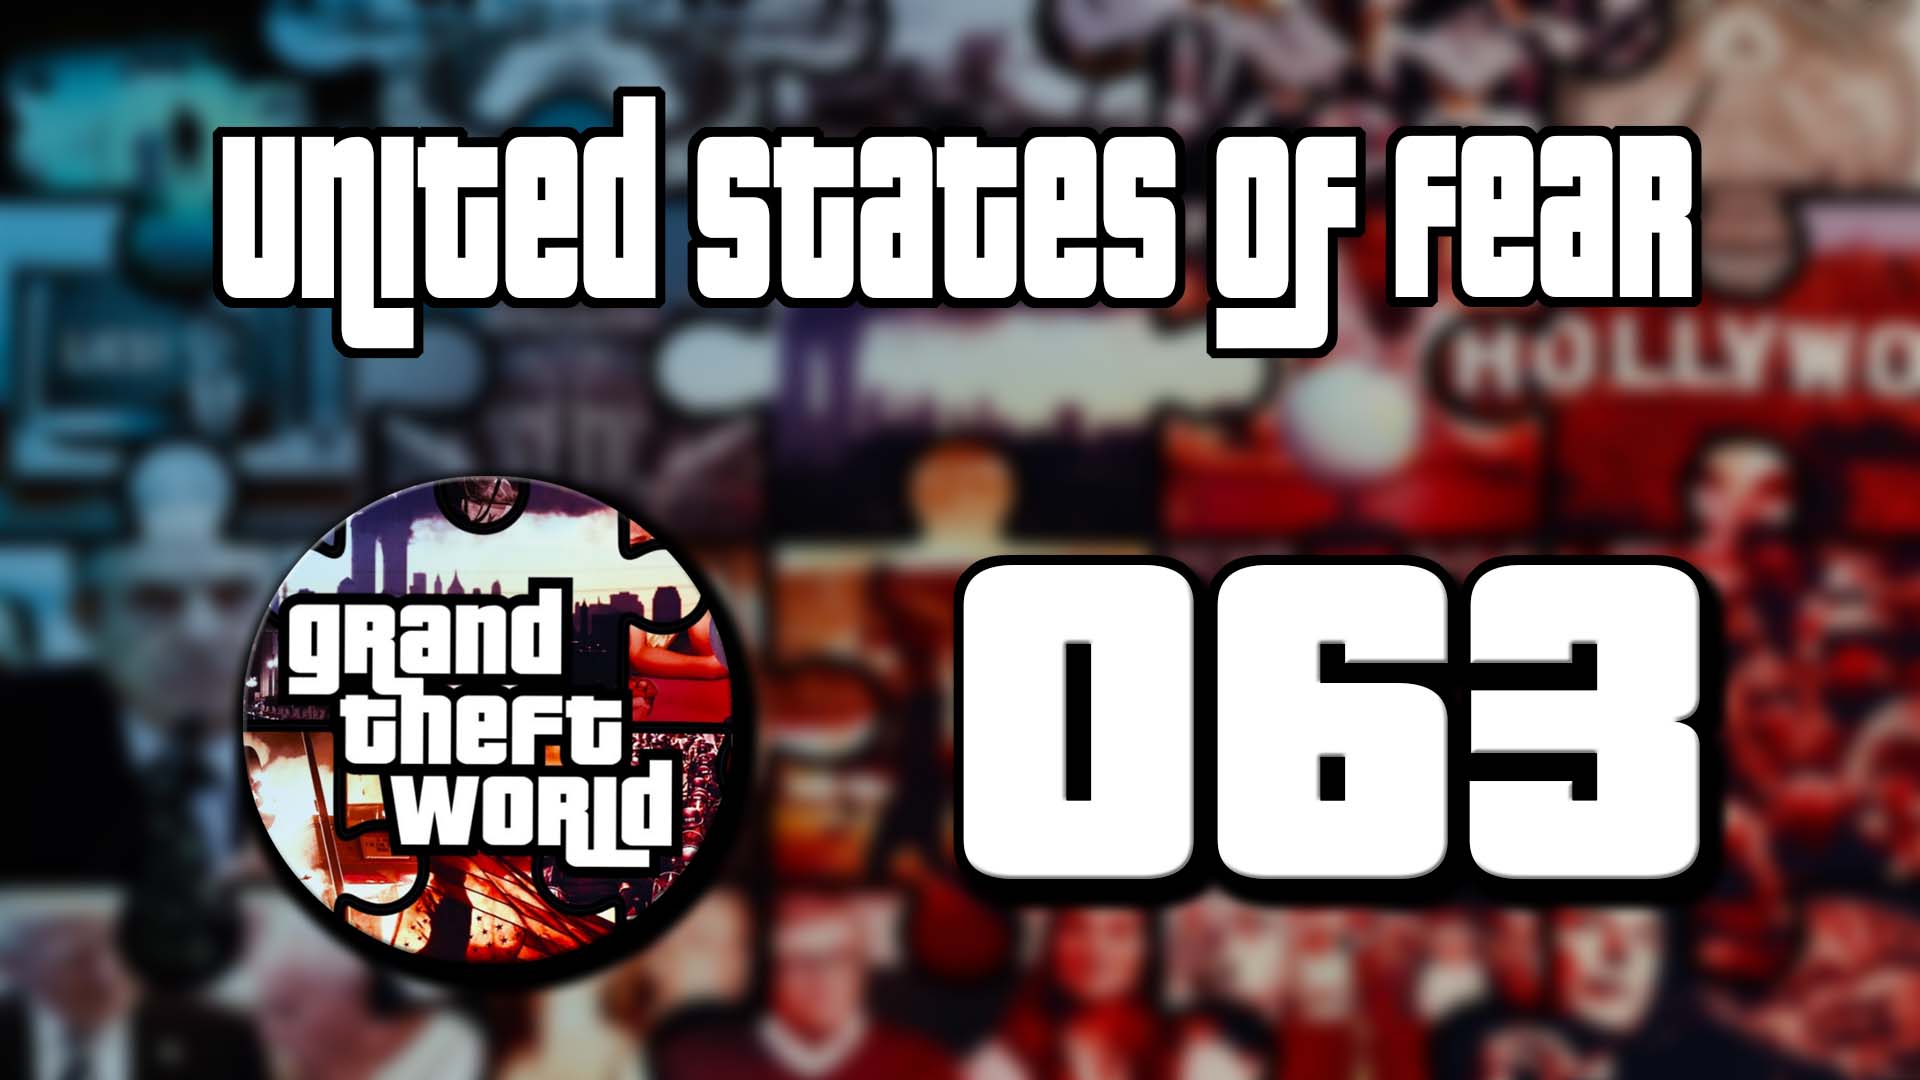 Grand Theft World Podcast 063 | United States of Fear